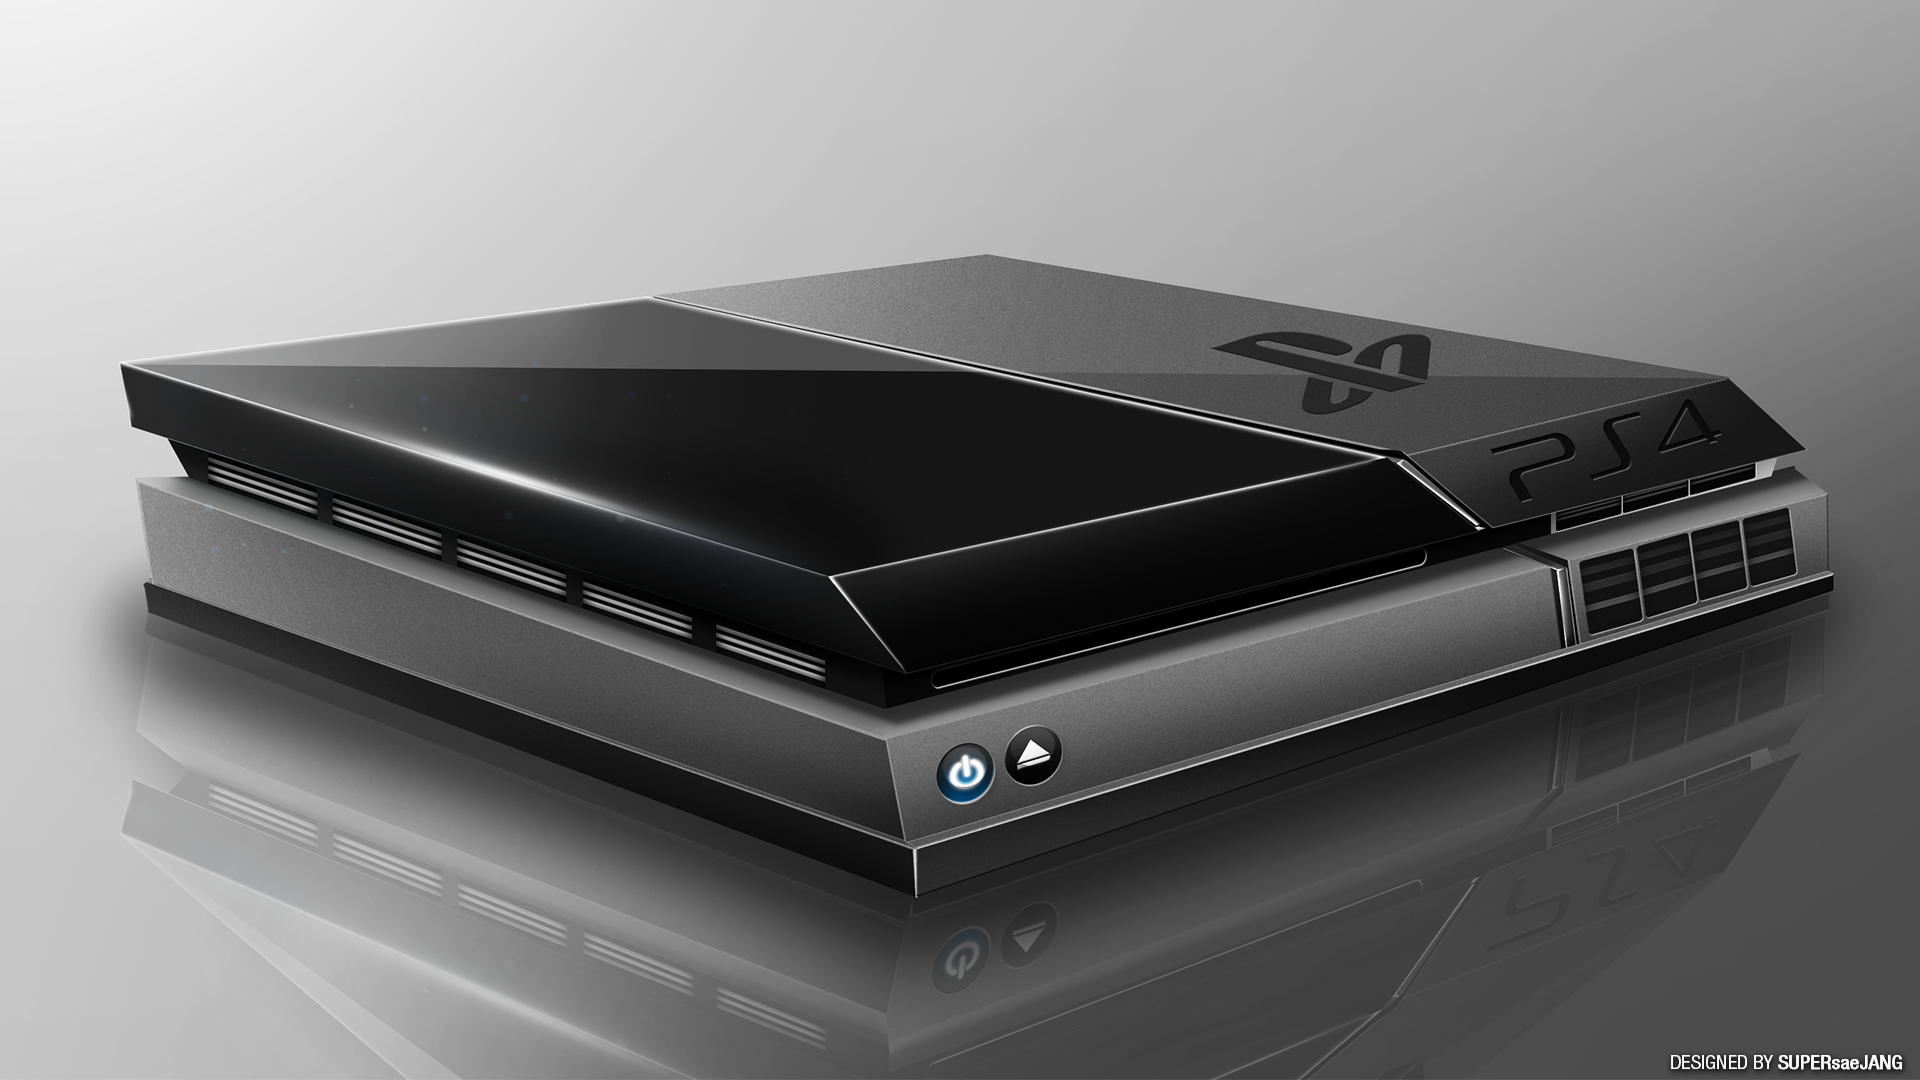 ps4_concept_design__based_roughly_on_teaser_video__by_supersaejang-d67dghh.png